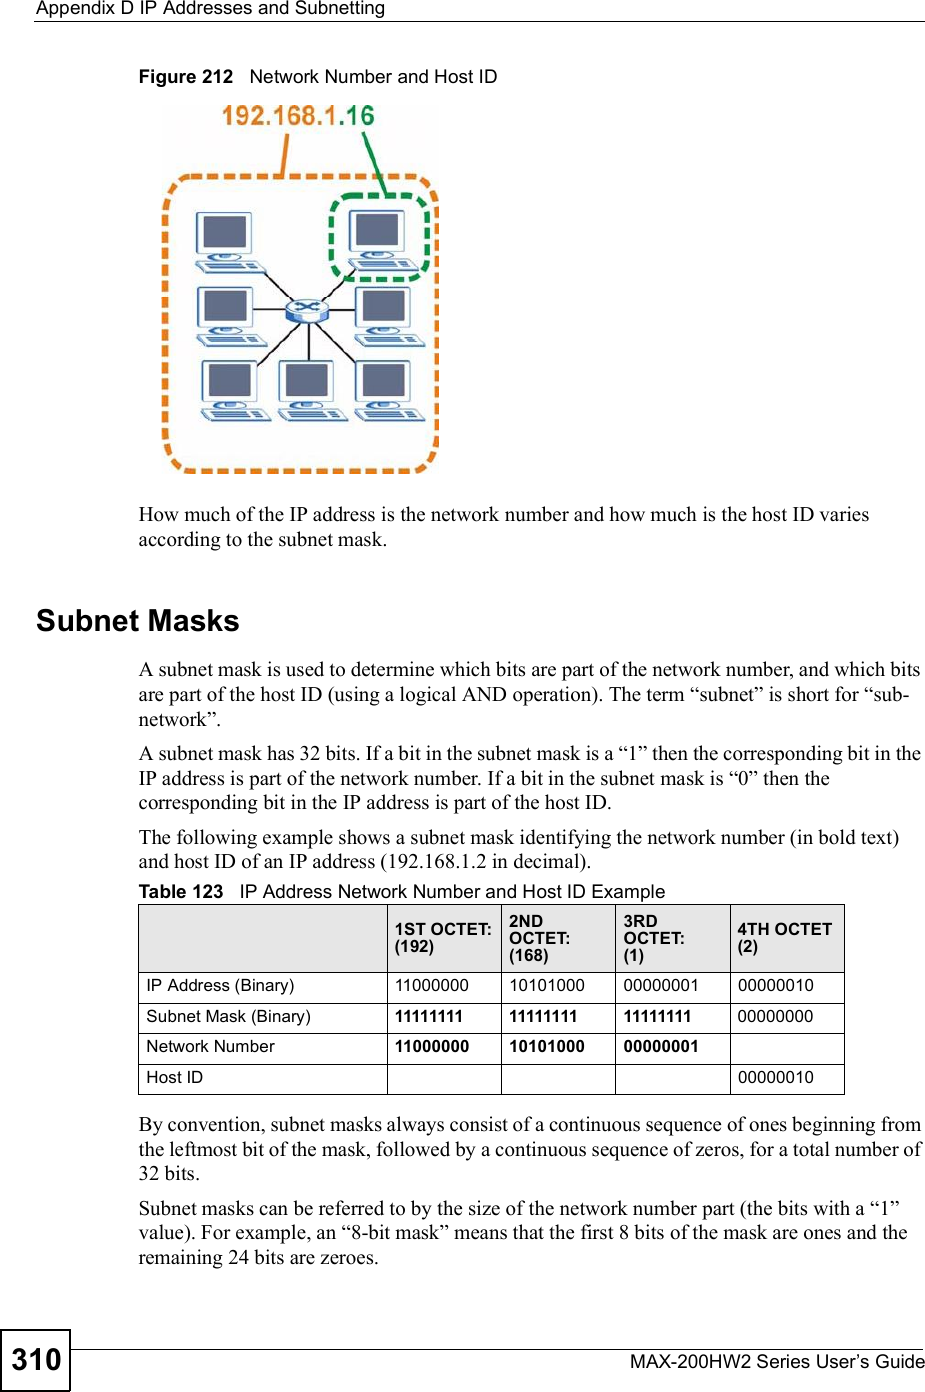 Appendix DIP Addresses and SubnettingMAX-200HW2 Series User s Guide310Figure 212   Network Number and Host IDHow much of the IP address is the network number and how much is the host ID varies according to the subnet mask.  Subnet MasksA subnet mask is used to determine which bits are part of the network number, and which bits are part of the host ID (using a logical AND operation). The term &quot;subnet# is short for &quot;sub-network#.A subnet mask has 32 bits. If a bit in the subnet mask is a &quot;1# then the corresponding bit in the IP address is part of the network number. If a bit in the subnet mask is &quot;0# then the corresponding bit in the IP address is part of the host ID. The following example shows a subnet mask identifying the network number (in bold text) and host ID of an IP address (192.168.1.2 in decimal).By convention, subnet masks always consist of a continuous sequence of ones beginning from the leftmost bit of the mask, followed by a continuous sequence of zeros, for a total number of 32 bits.Subnet masks can be referred to by the size of the network number part (the bits with a &quot;1# value). For example, an &quot;8-bit mask# means that the first 8 bits of the mask are ones and the remaining 24 bits are zeroes.Table 123   IP Address Network Number and Host ID Example1ST OCTET:(192)2ND OCTET:(168)3RD OCTET:(1)4TH OCTET(2)IP Address (Binary)11000000101010000000000100000010Subnet Mask (Binary) 111111111111111111111111 00000000Network Number 110000001010100000000001Host ID00000010